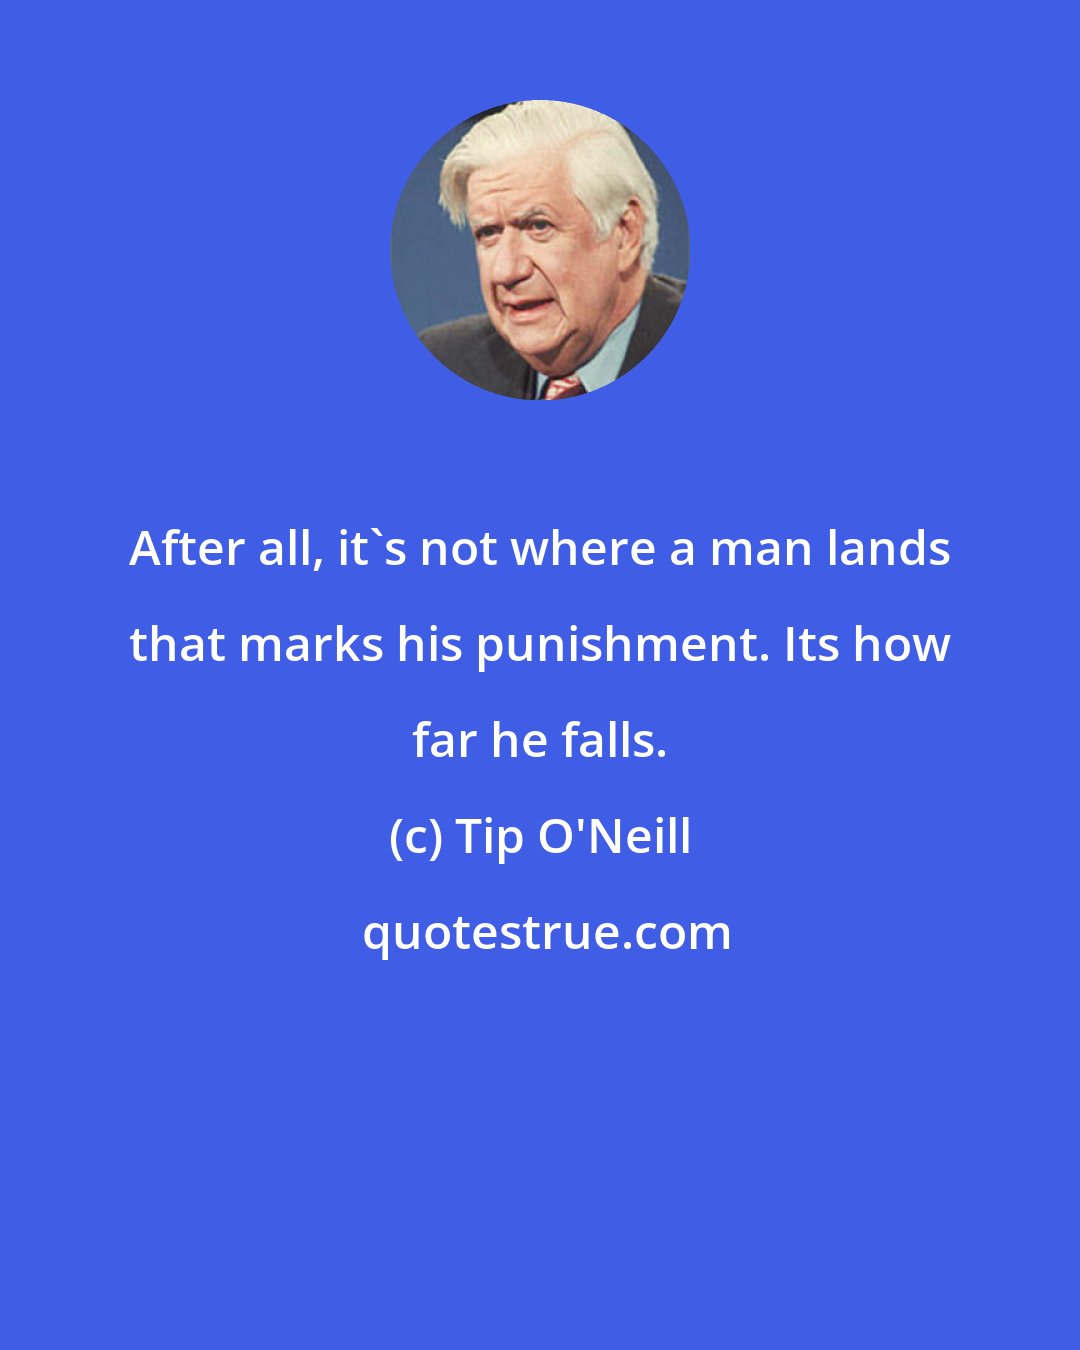 Tip O'Neill: After all, it's not where a man lands that marks his punishment. Its how far he falls.